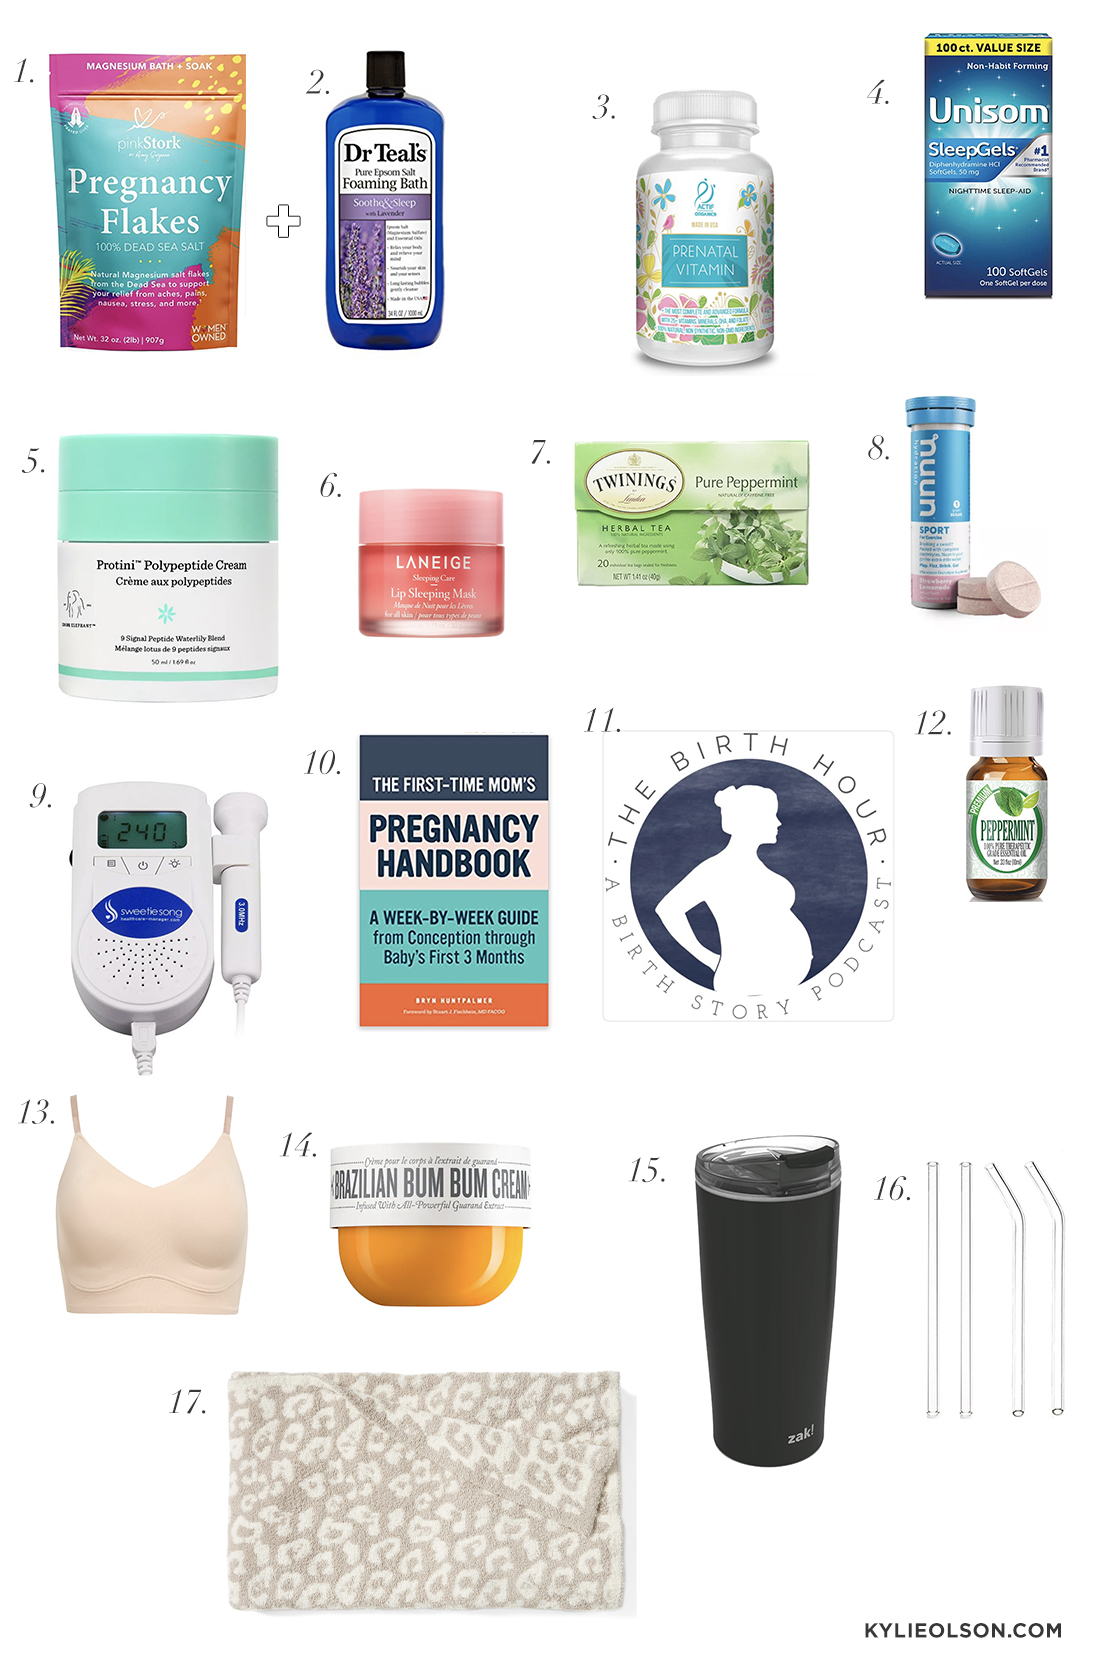 Third Trimester Pregnancy Must Haves